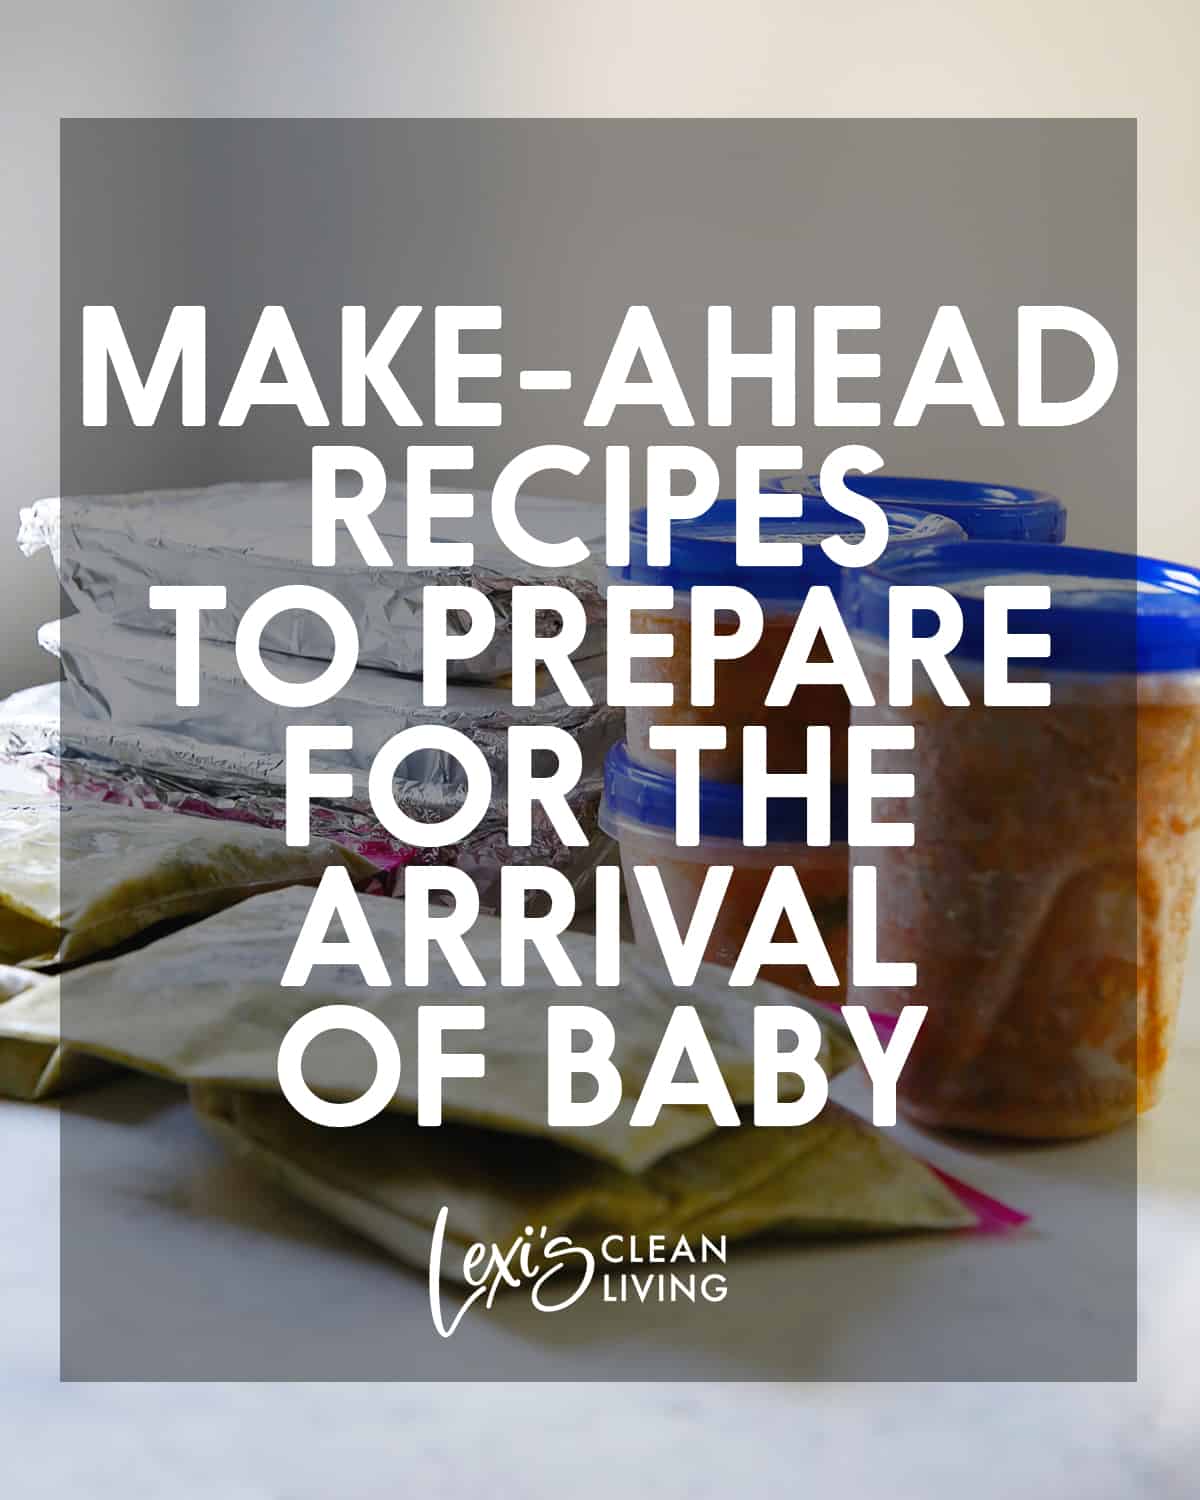 Make-Ahead Recipes to Prepare for the Arrival of Baby